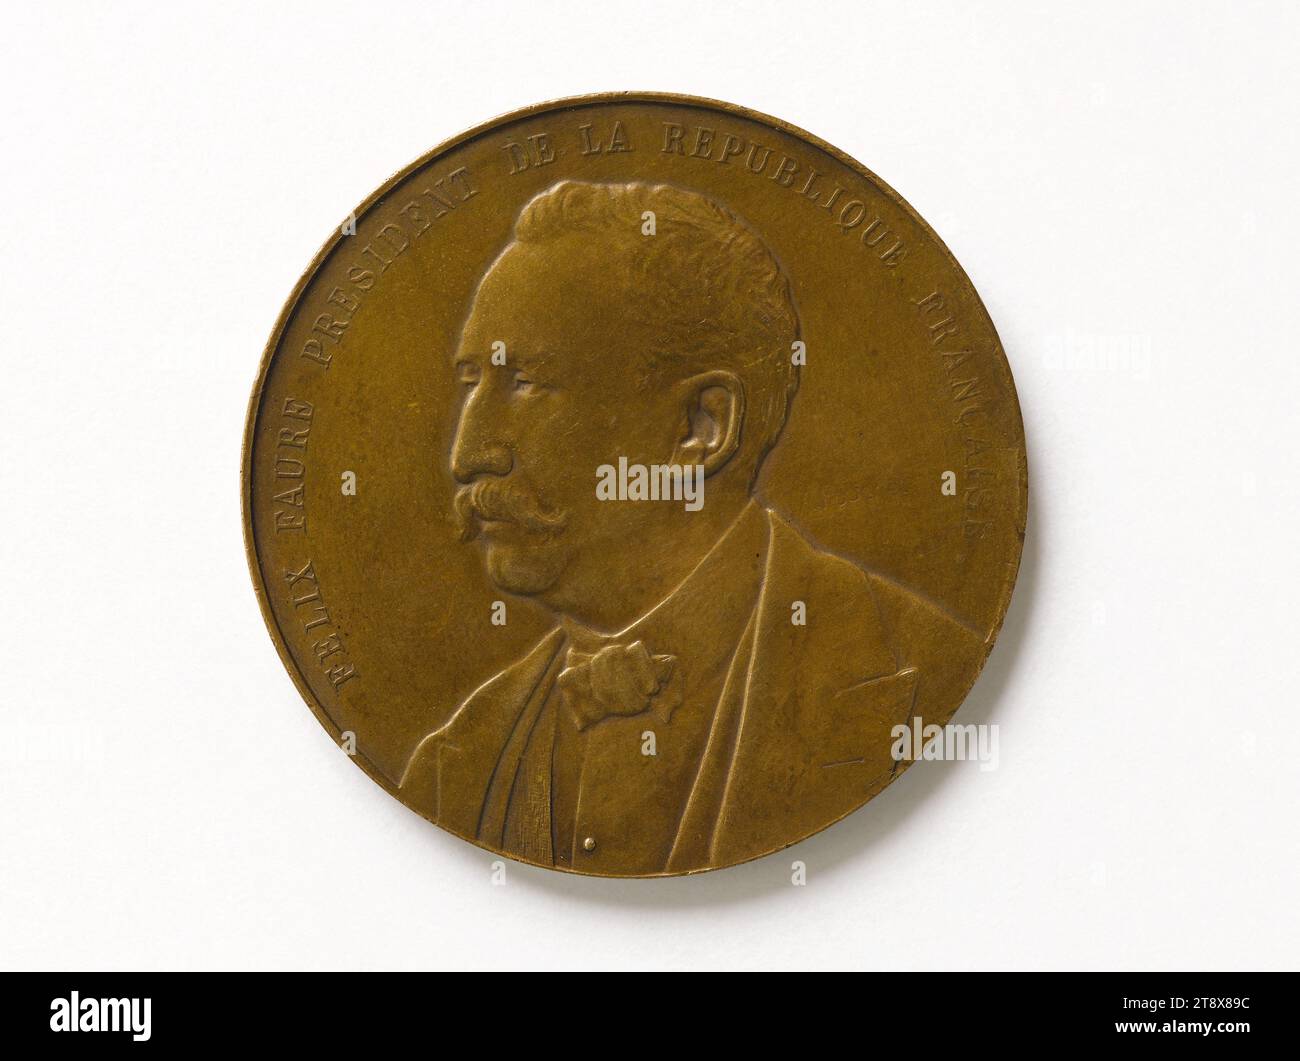 Félix Faure (1841-1899), President of the Republic (1895-1899), 1895, Fouchet, A., Engraver in medals, Array, Numismatics, Medal, Dimensions - Work: Diameter: 4 cm, Weight (type dimension): 21.52 g Stock Photo